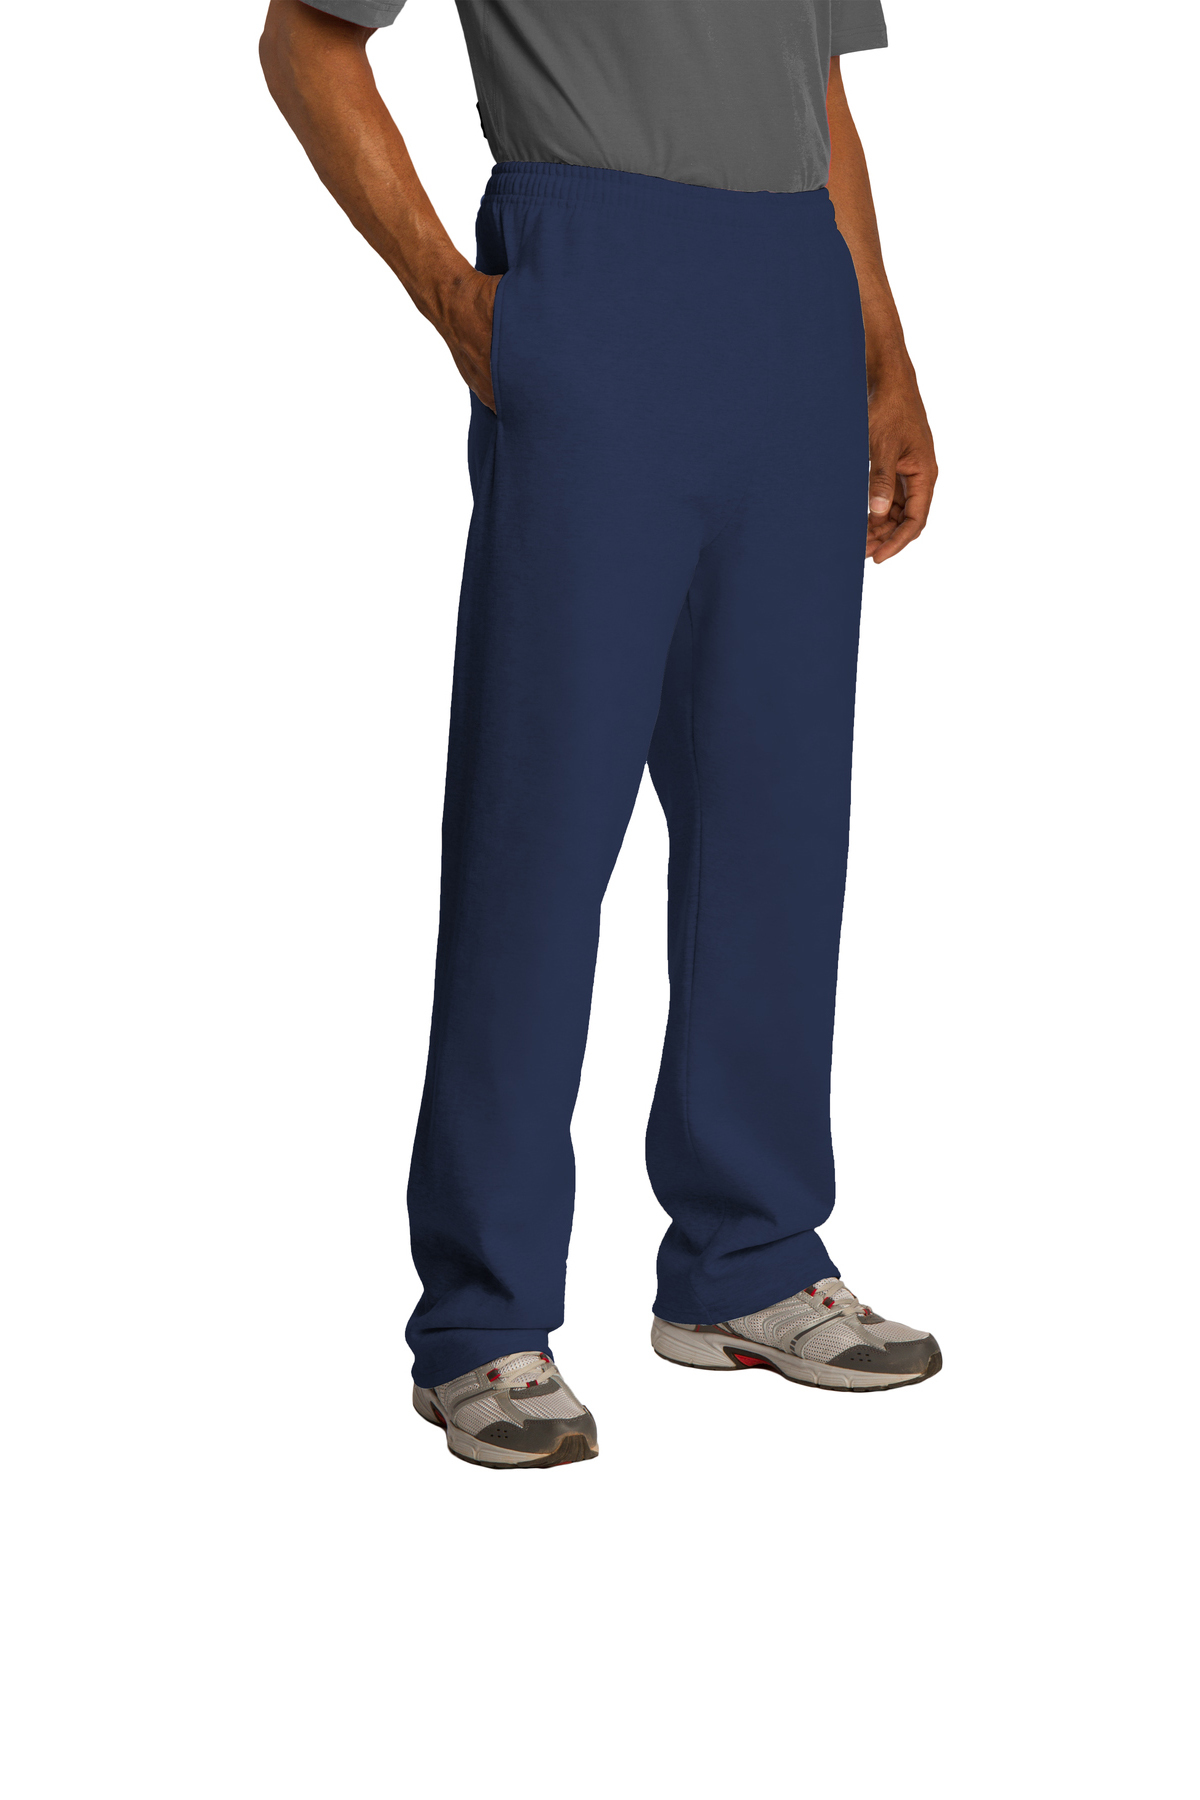 Jerzees NuBlend Open Bottom Pant with Pockets | Product | SanMar